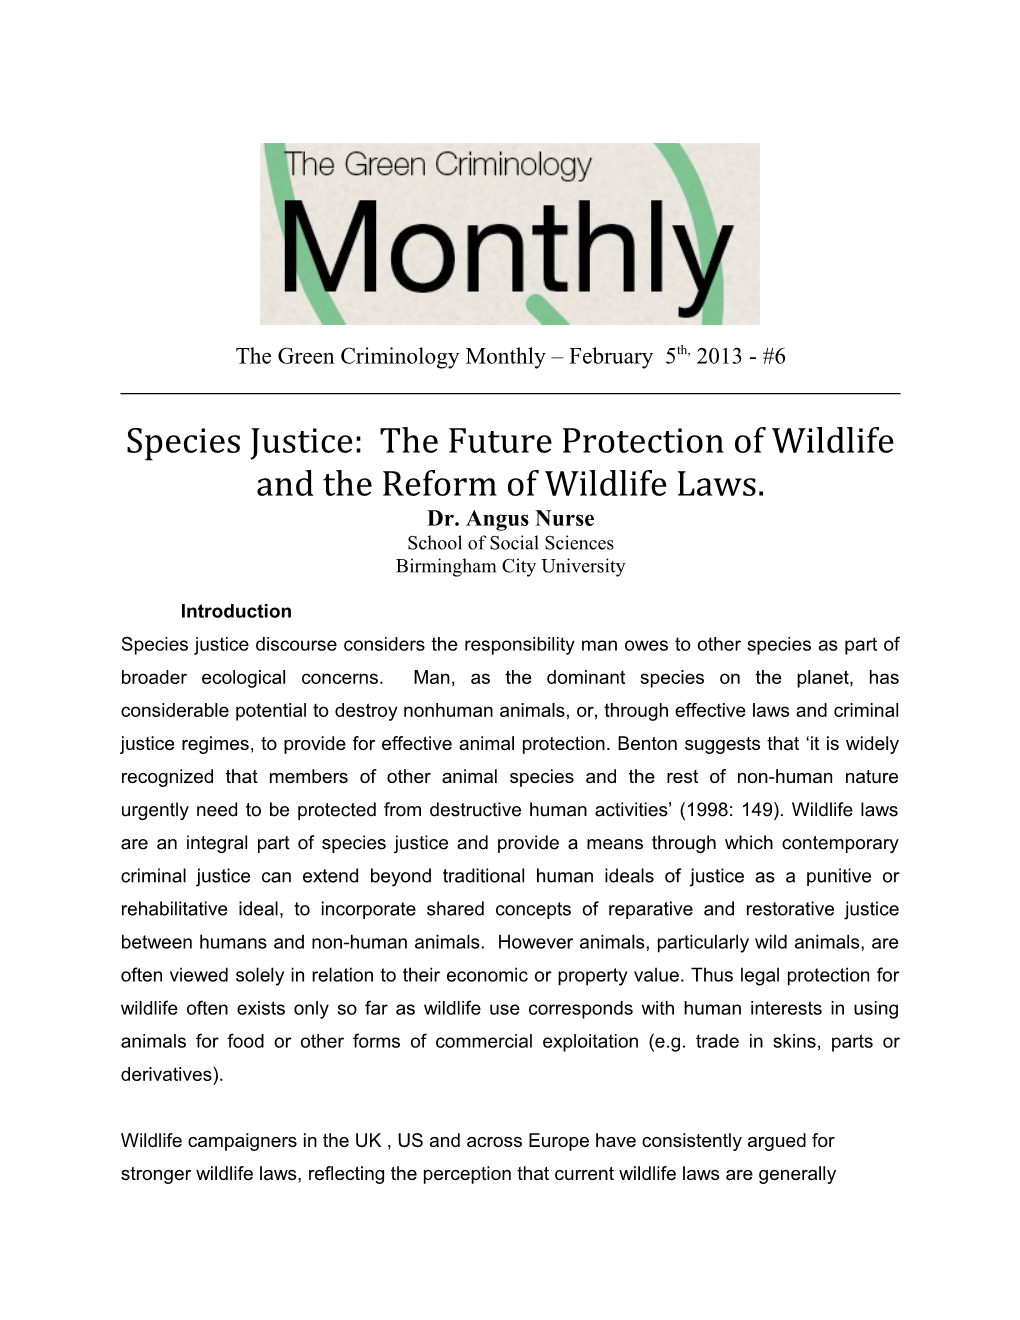 Species Justice: the Future Protection of Wildlife and the Reform of Wildlife Laws